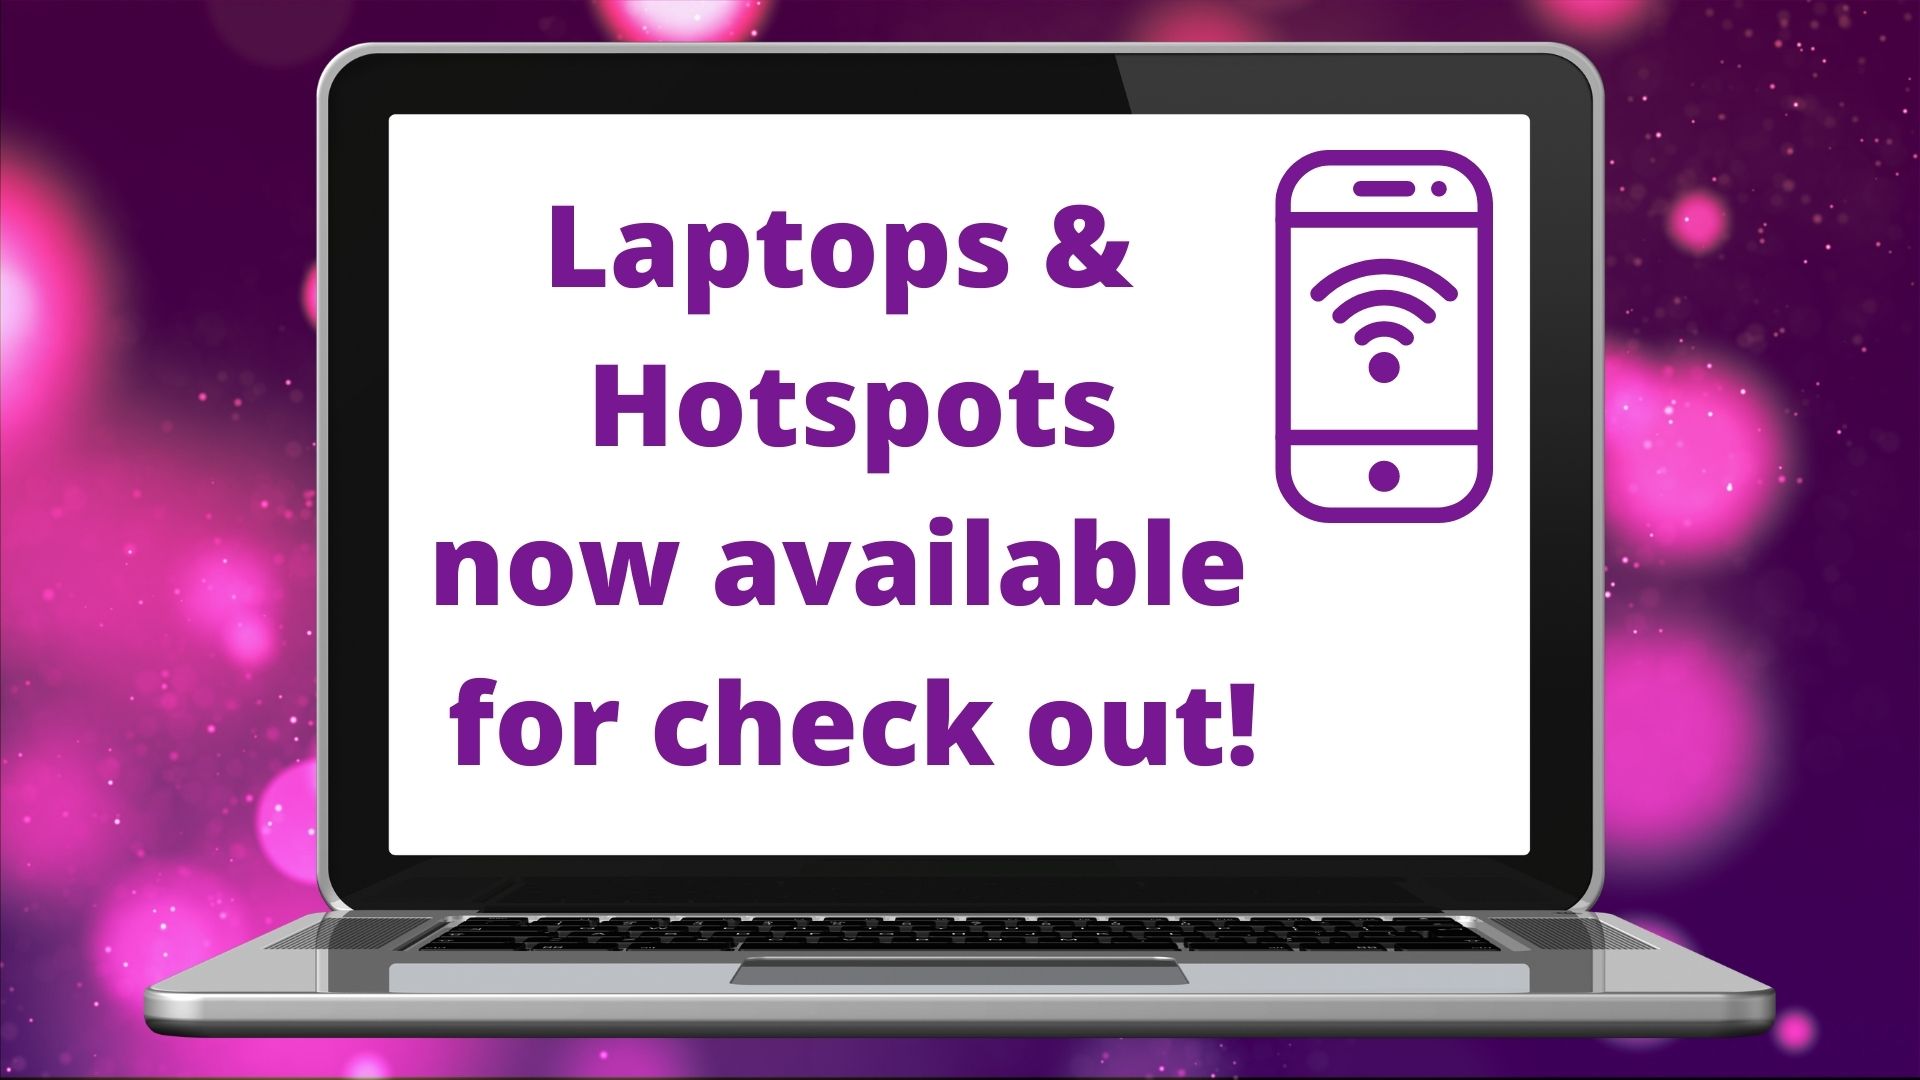 Laptops & Hot-spots available!